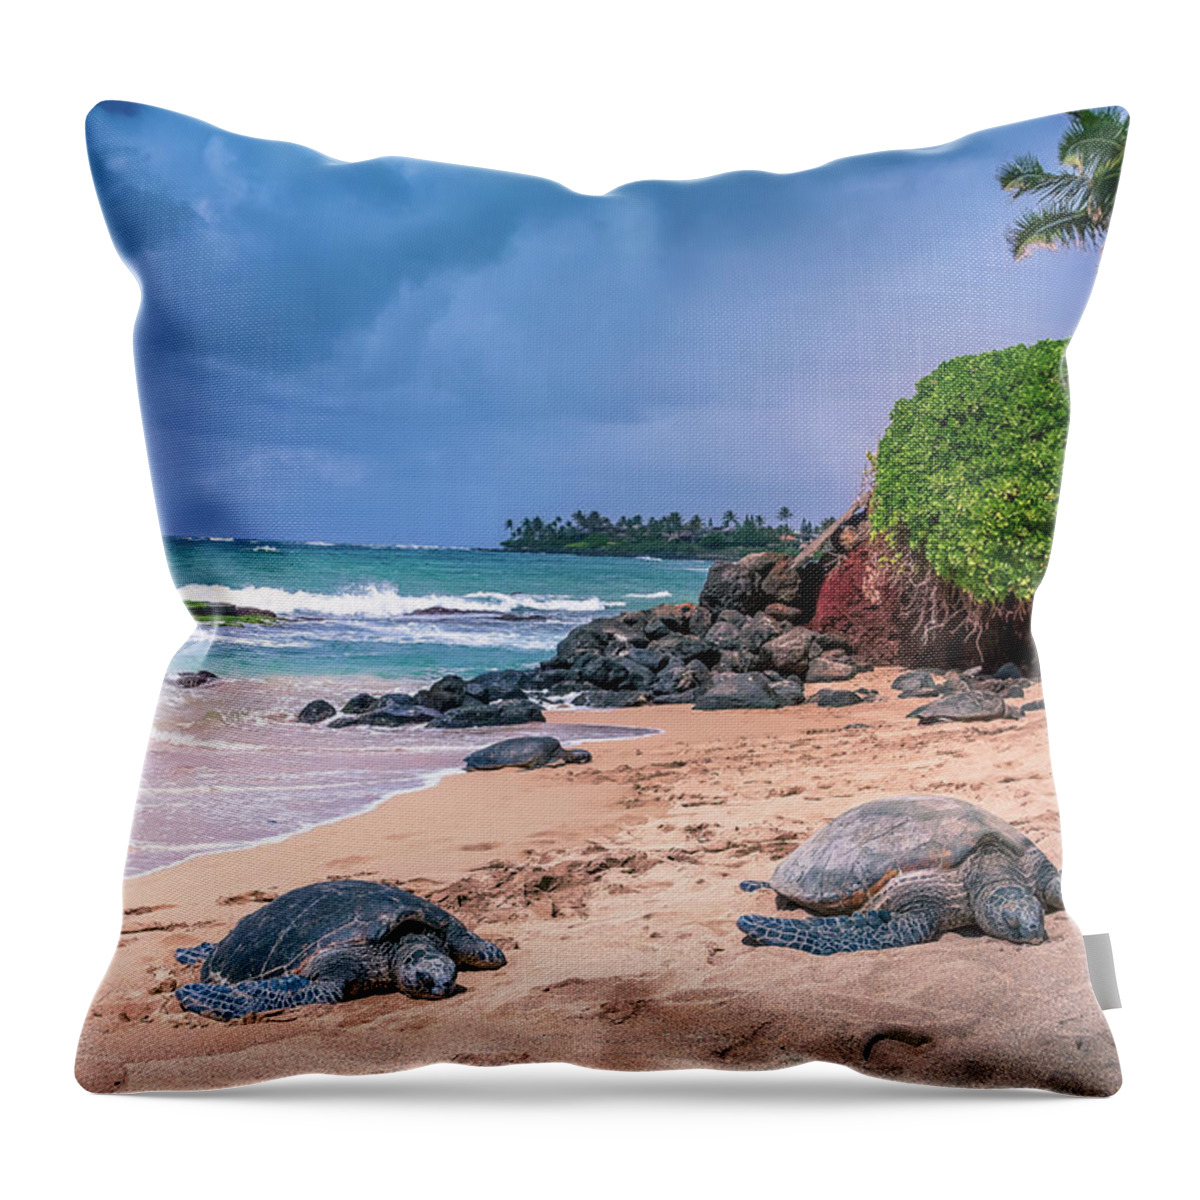 Maui Turtles Throw Pillow featuring the photograph Maui Sea Turles by Chris Spencer